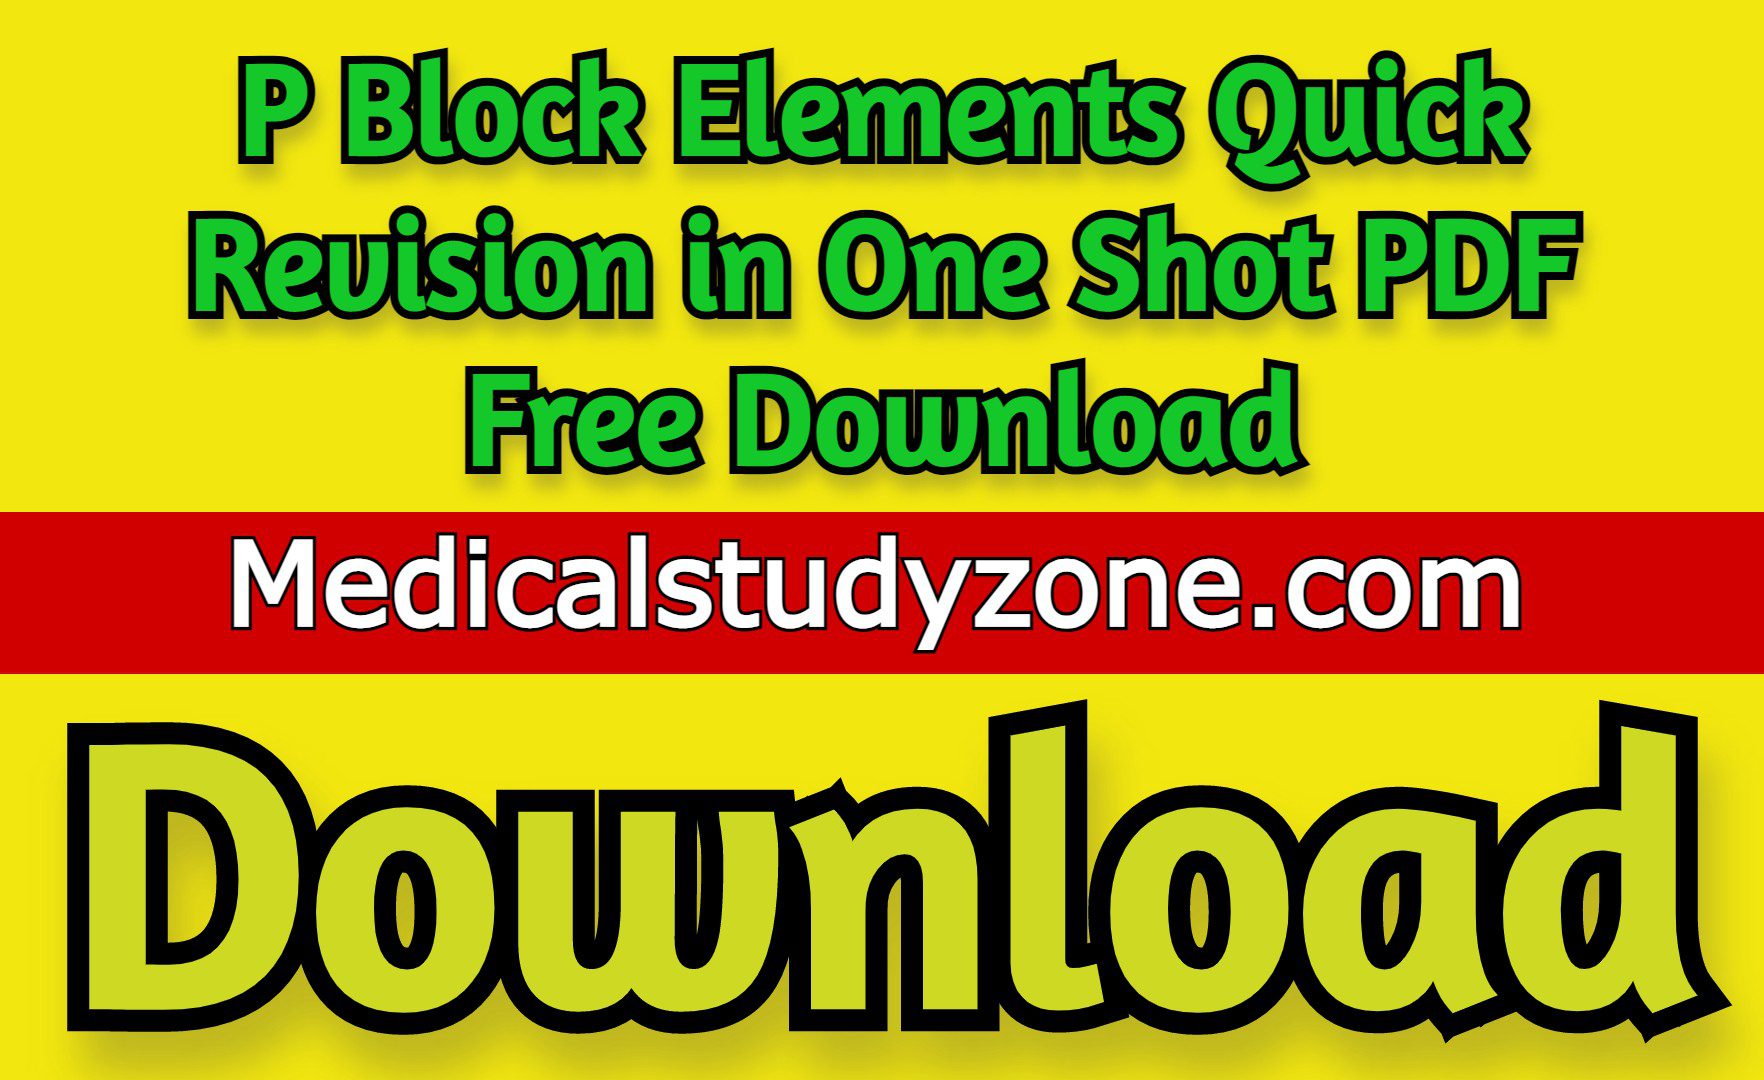 P Block Elements Quick Revision in One Shot PDF Free Download